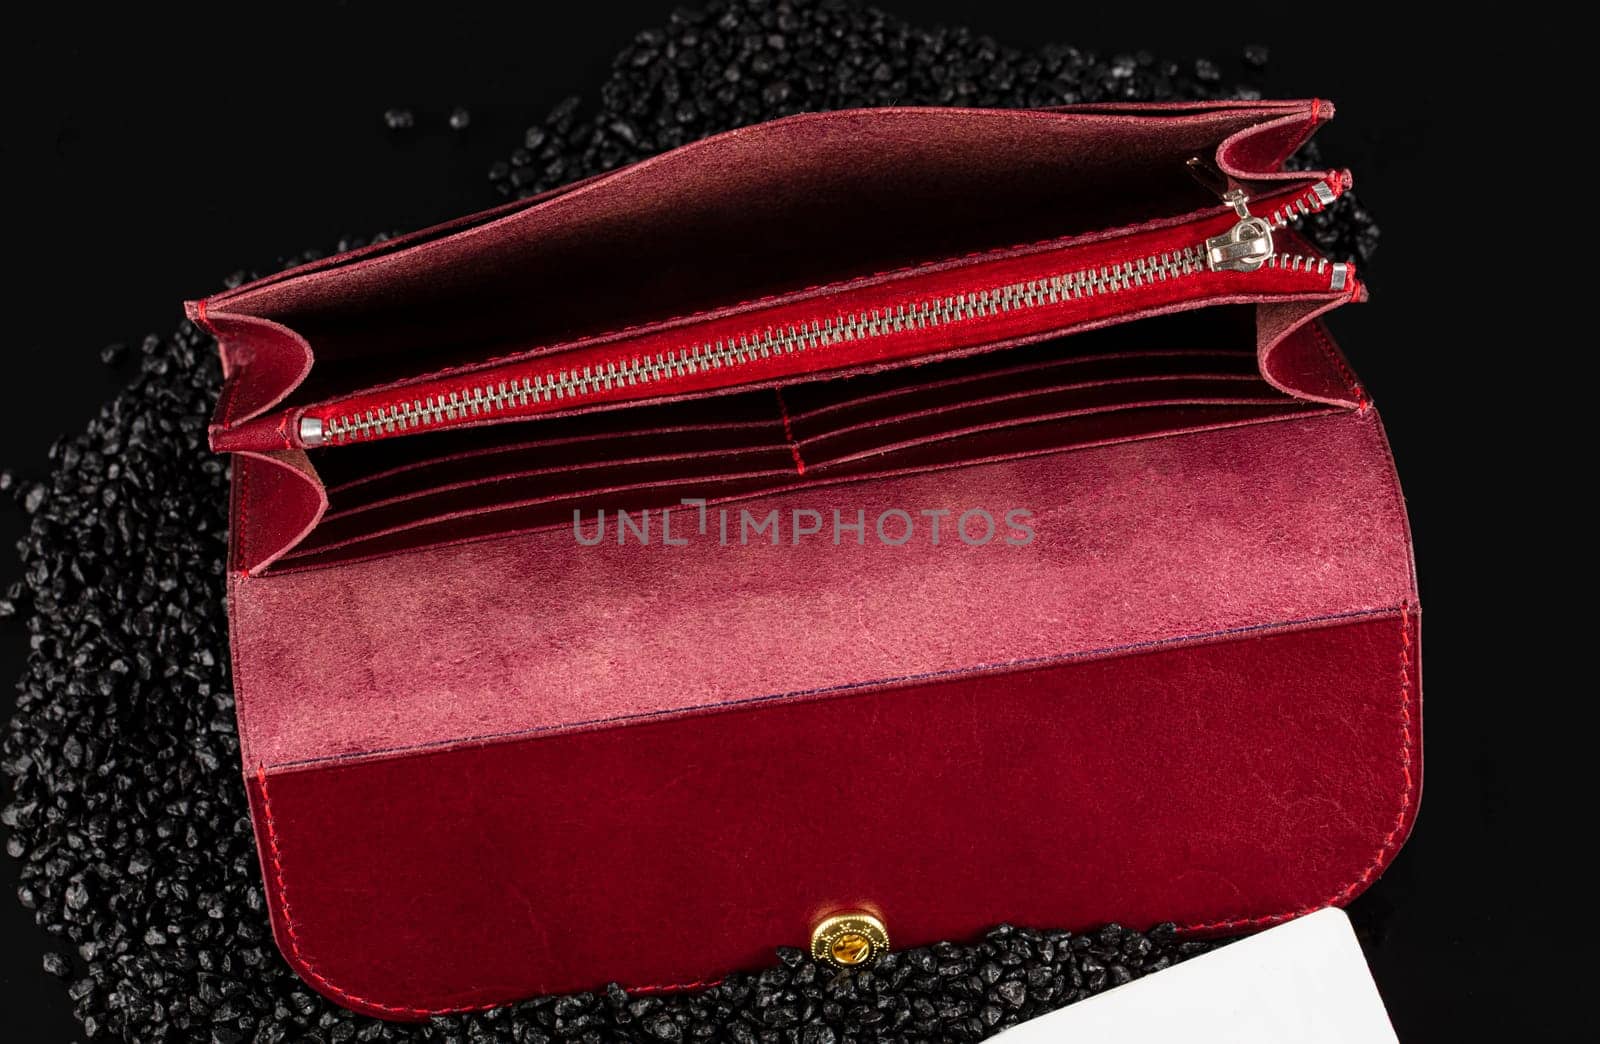 Open red leather wallet and purse on a black background.